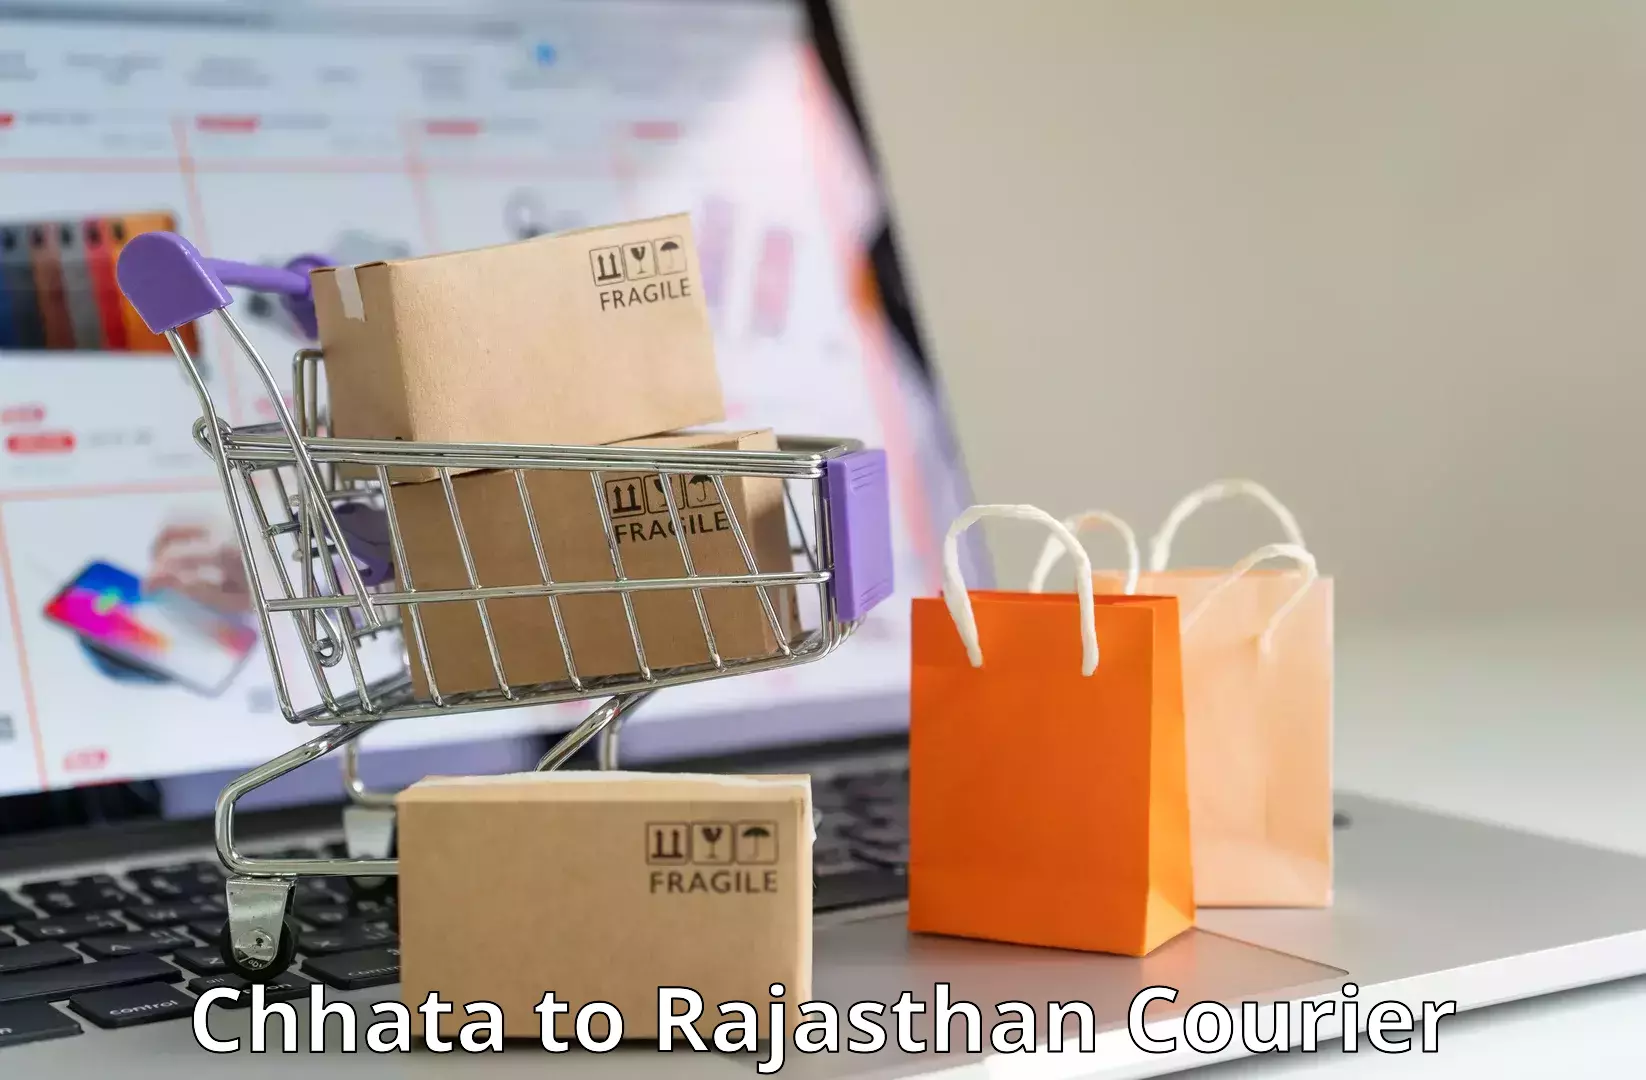 Courier service efficiency Chhata to Rajasthan